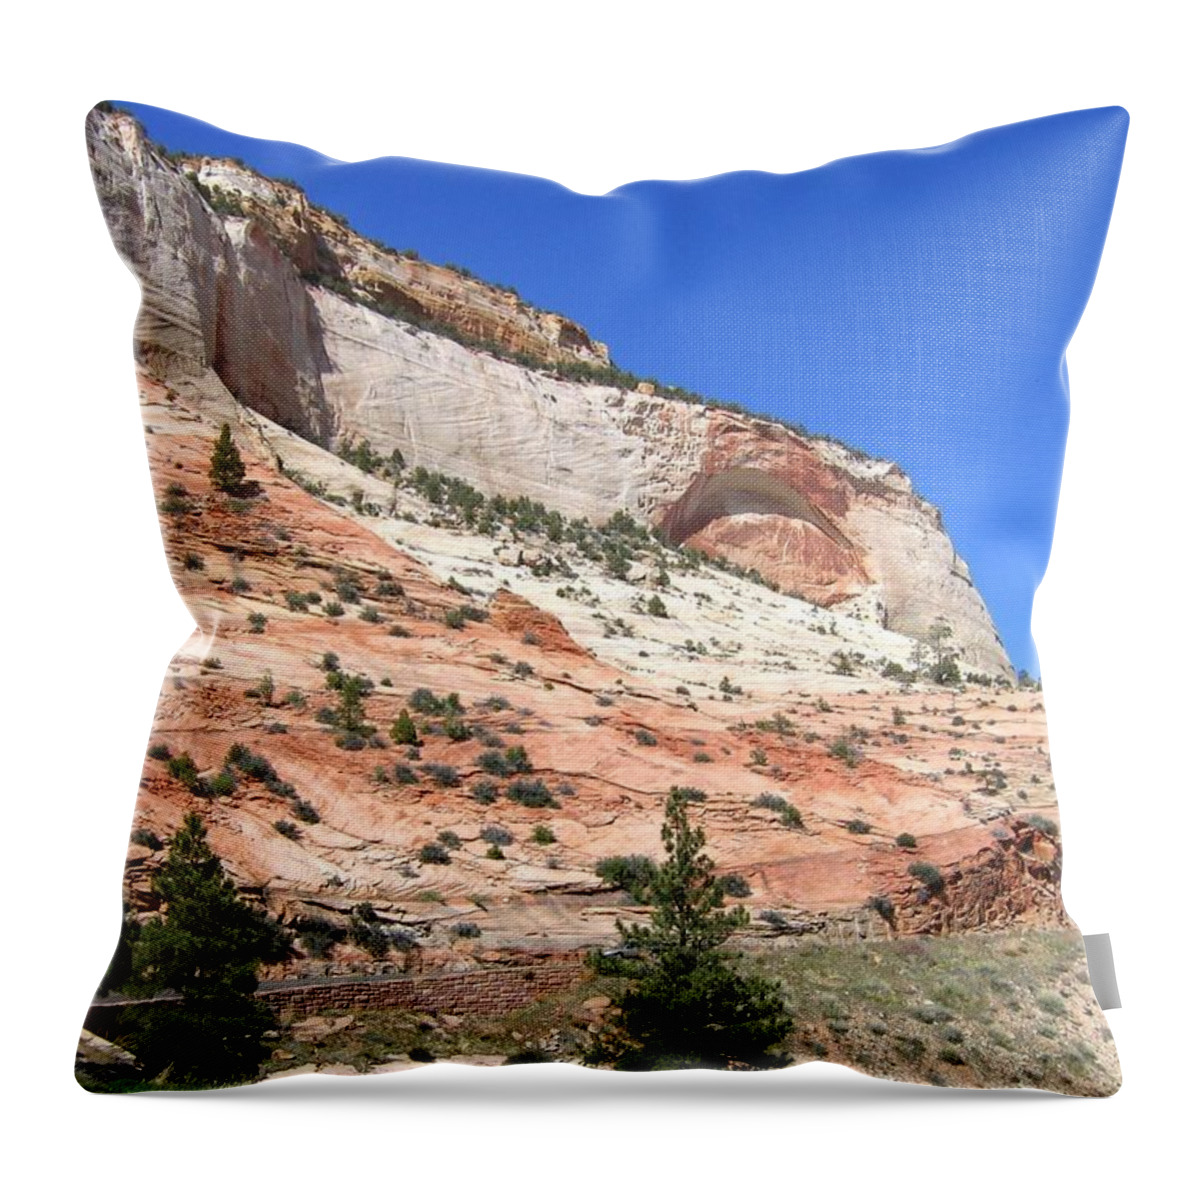 Utah Throw Pillow featuring the photograph Utah 18 by Will Borden